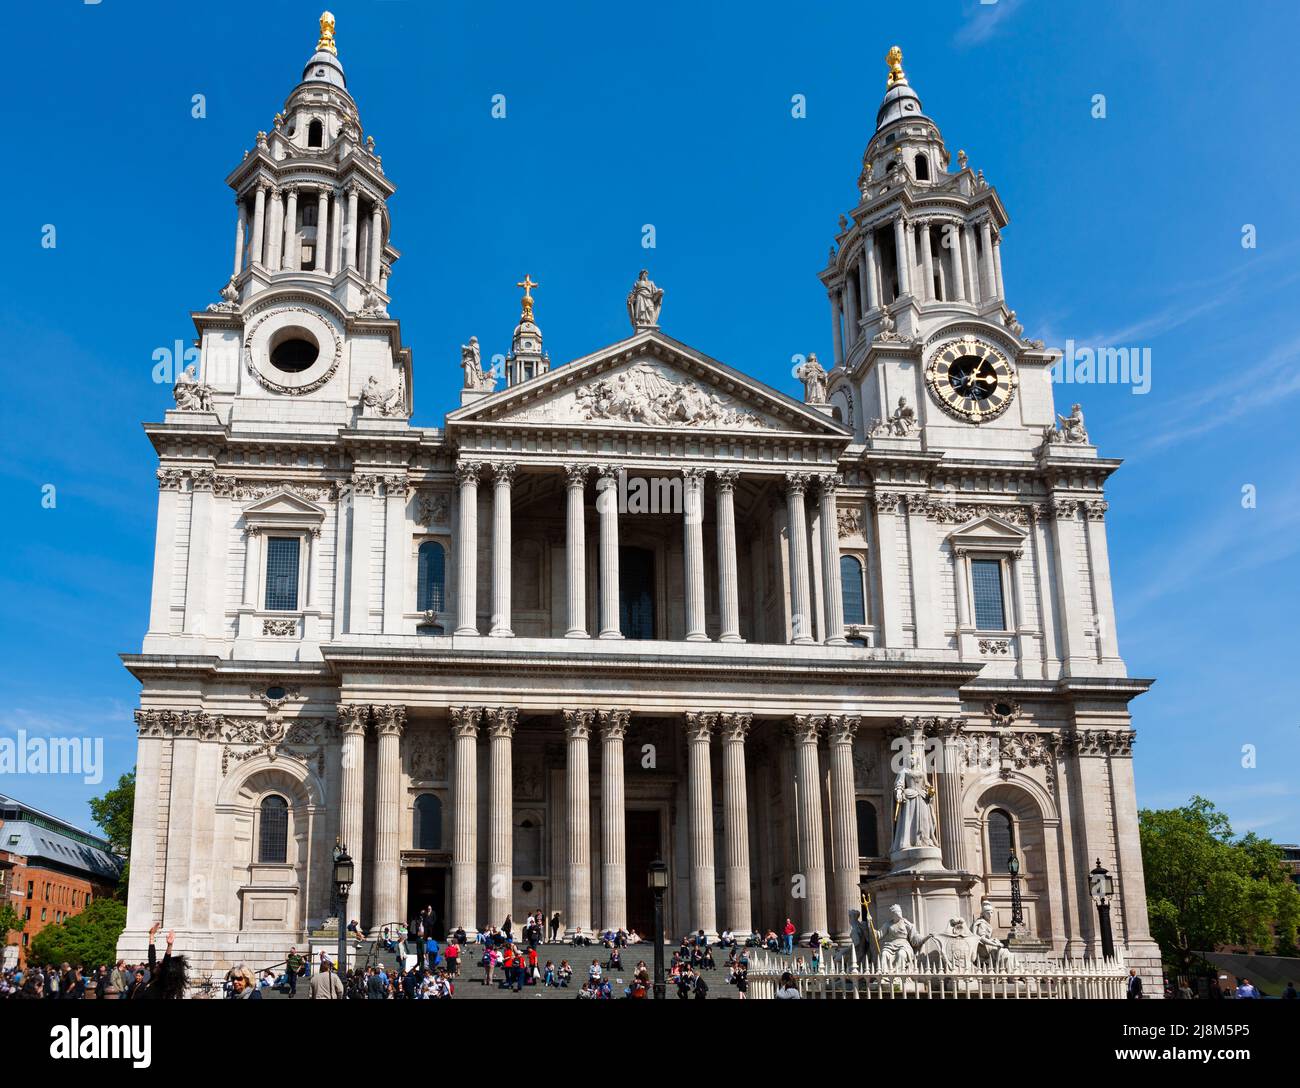 London, England - May 5, 2011 : St. Paul's Cathedral. Landmark baroque style Anglican church designed by Sir Christopher Wren. Stock Photo